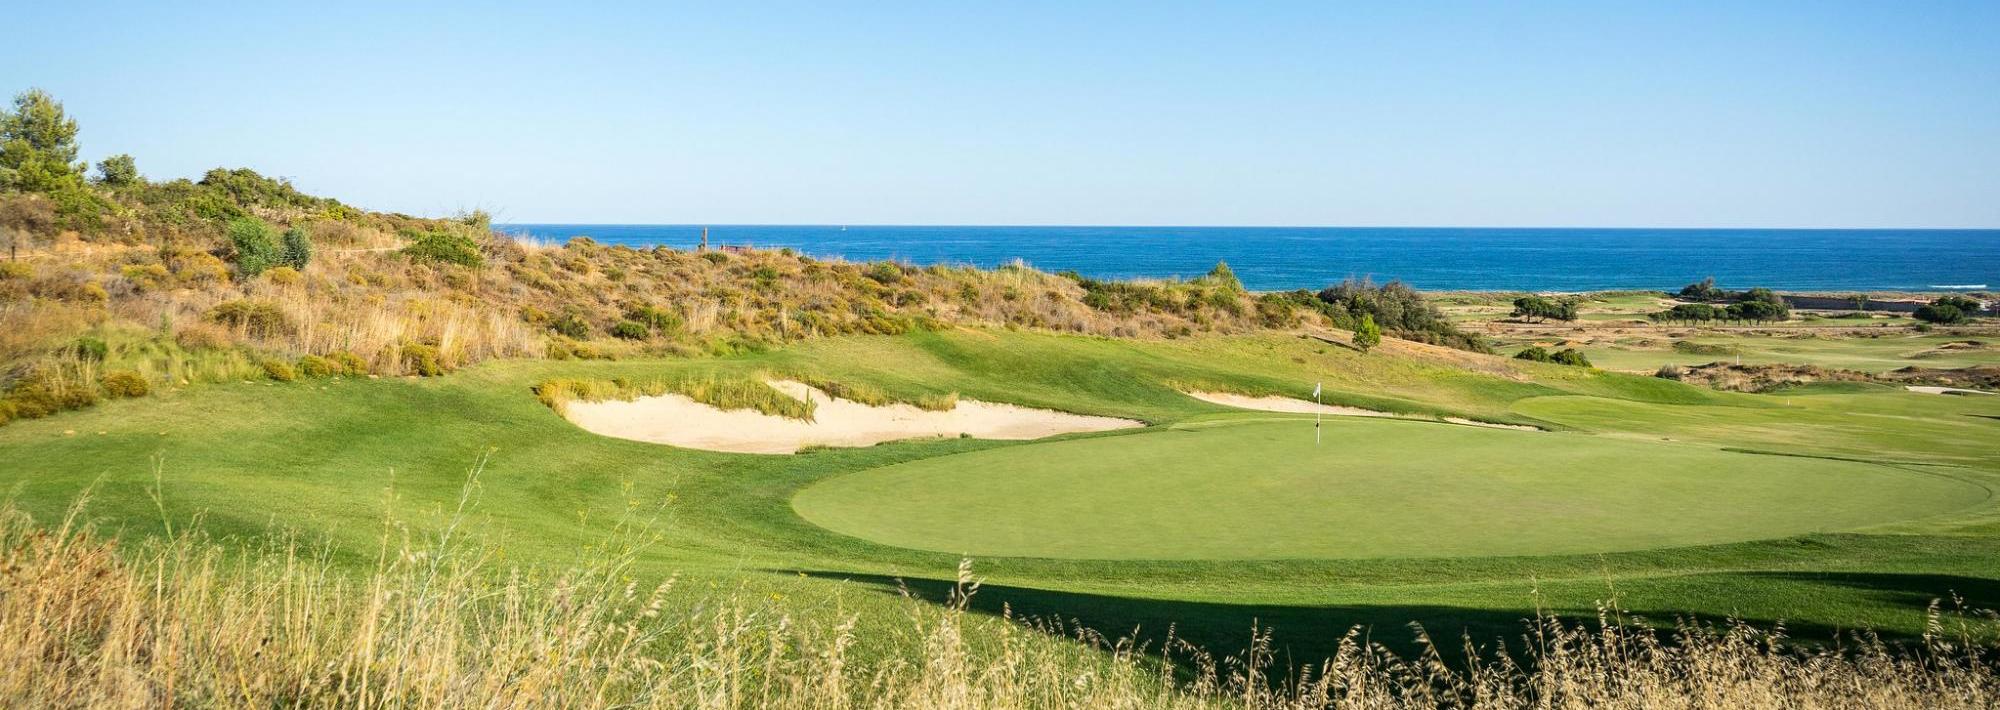 View Onyria Palmares Golf Club's lovely golf course in magnificent Algarve.